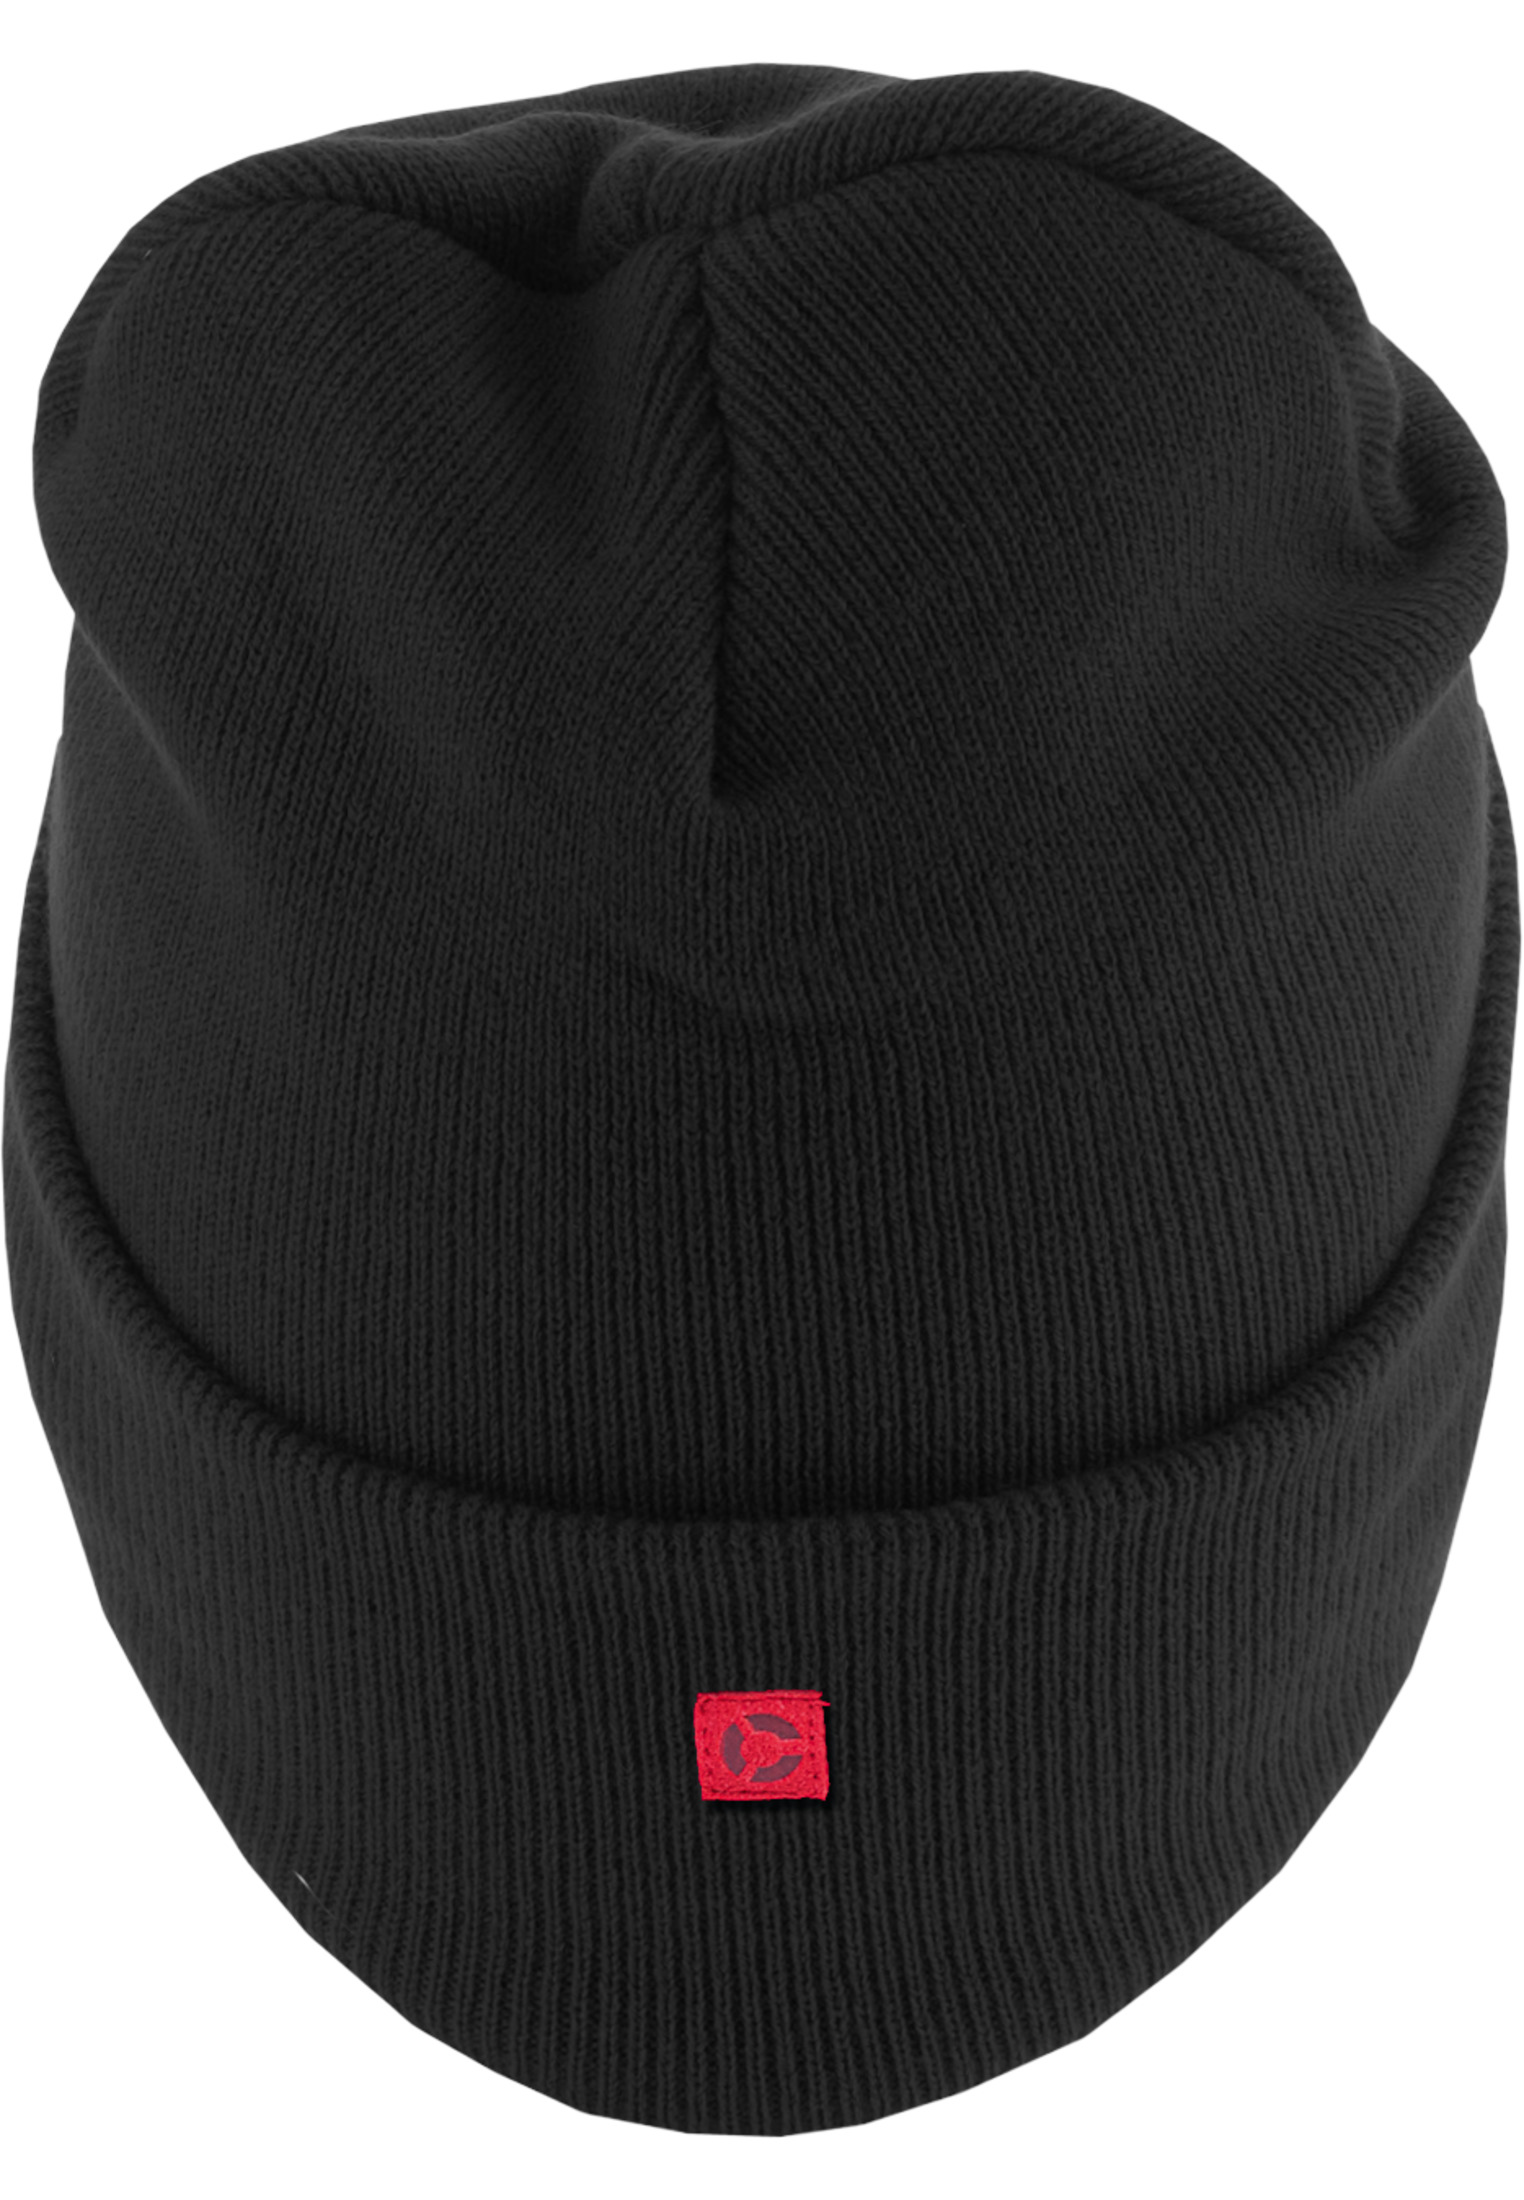 Caps & Beanies Letter Cuff Knit Beanie in Farbe F